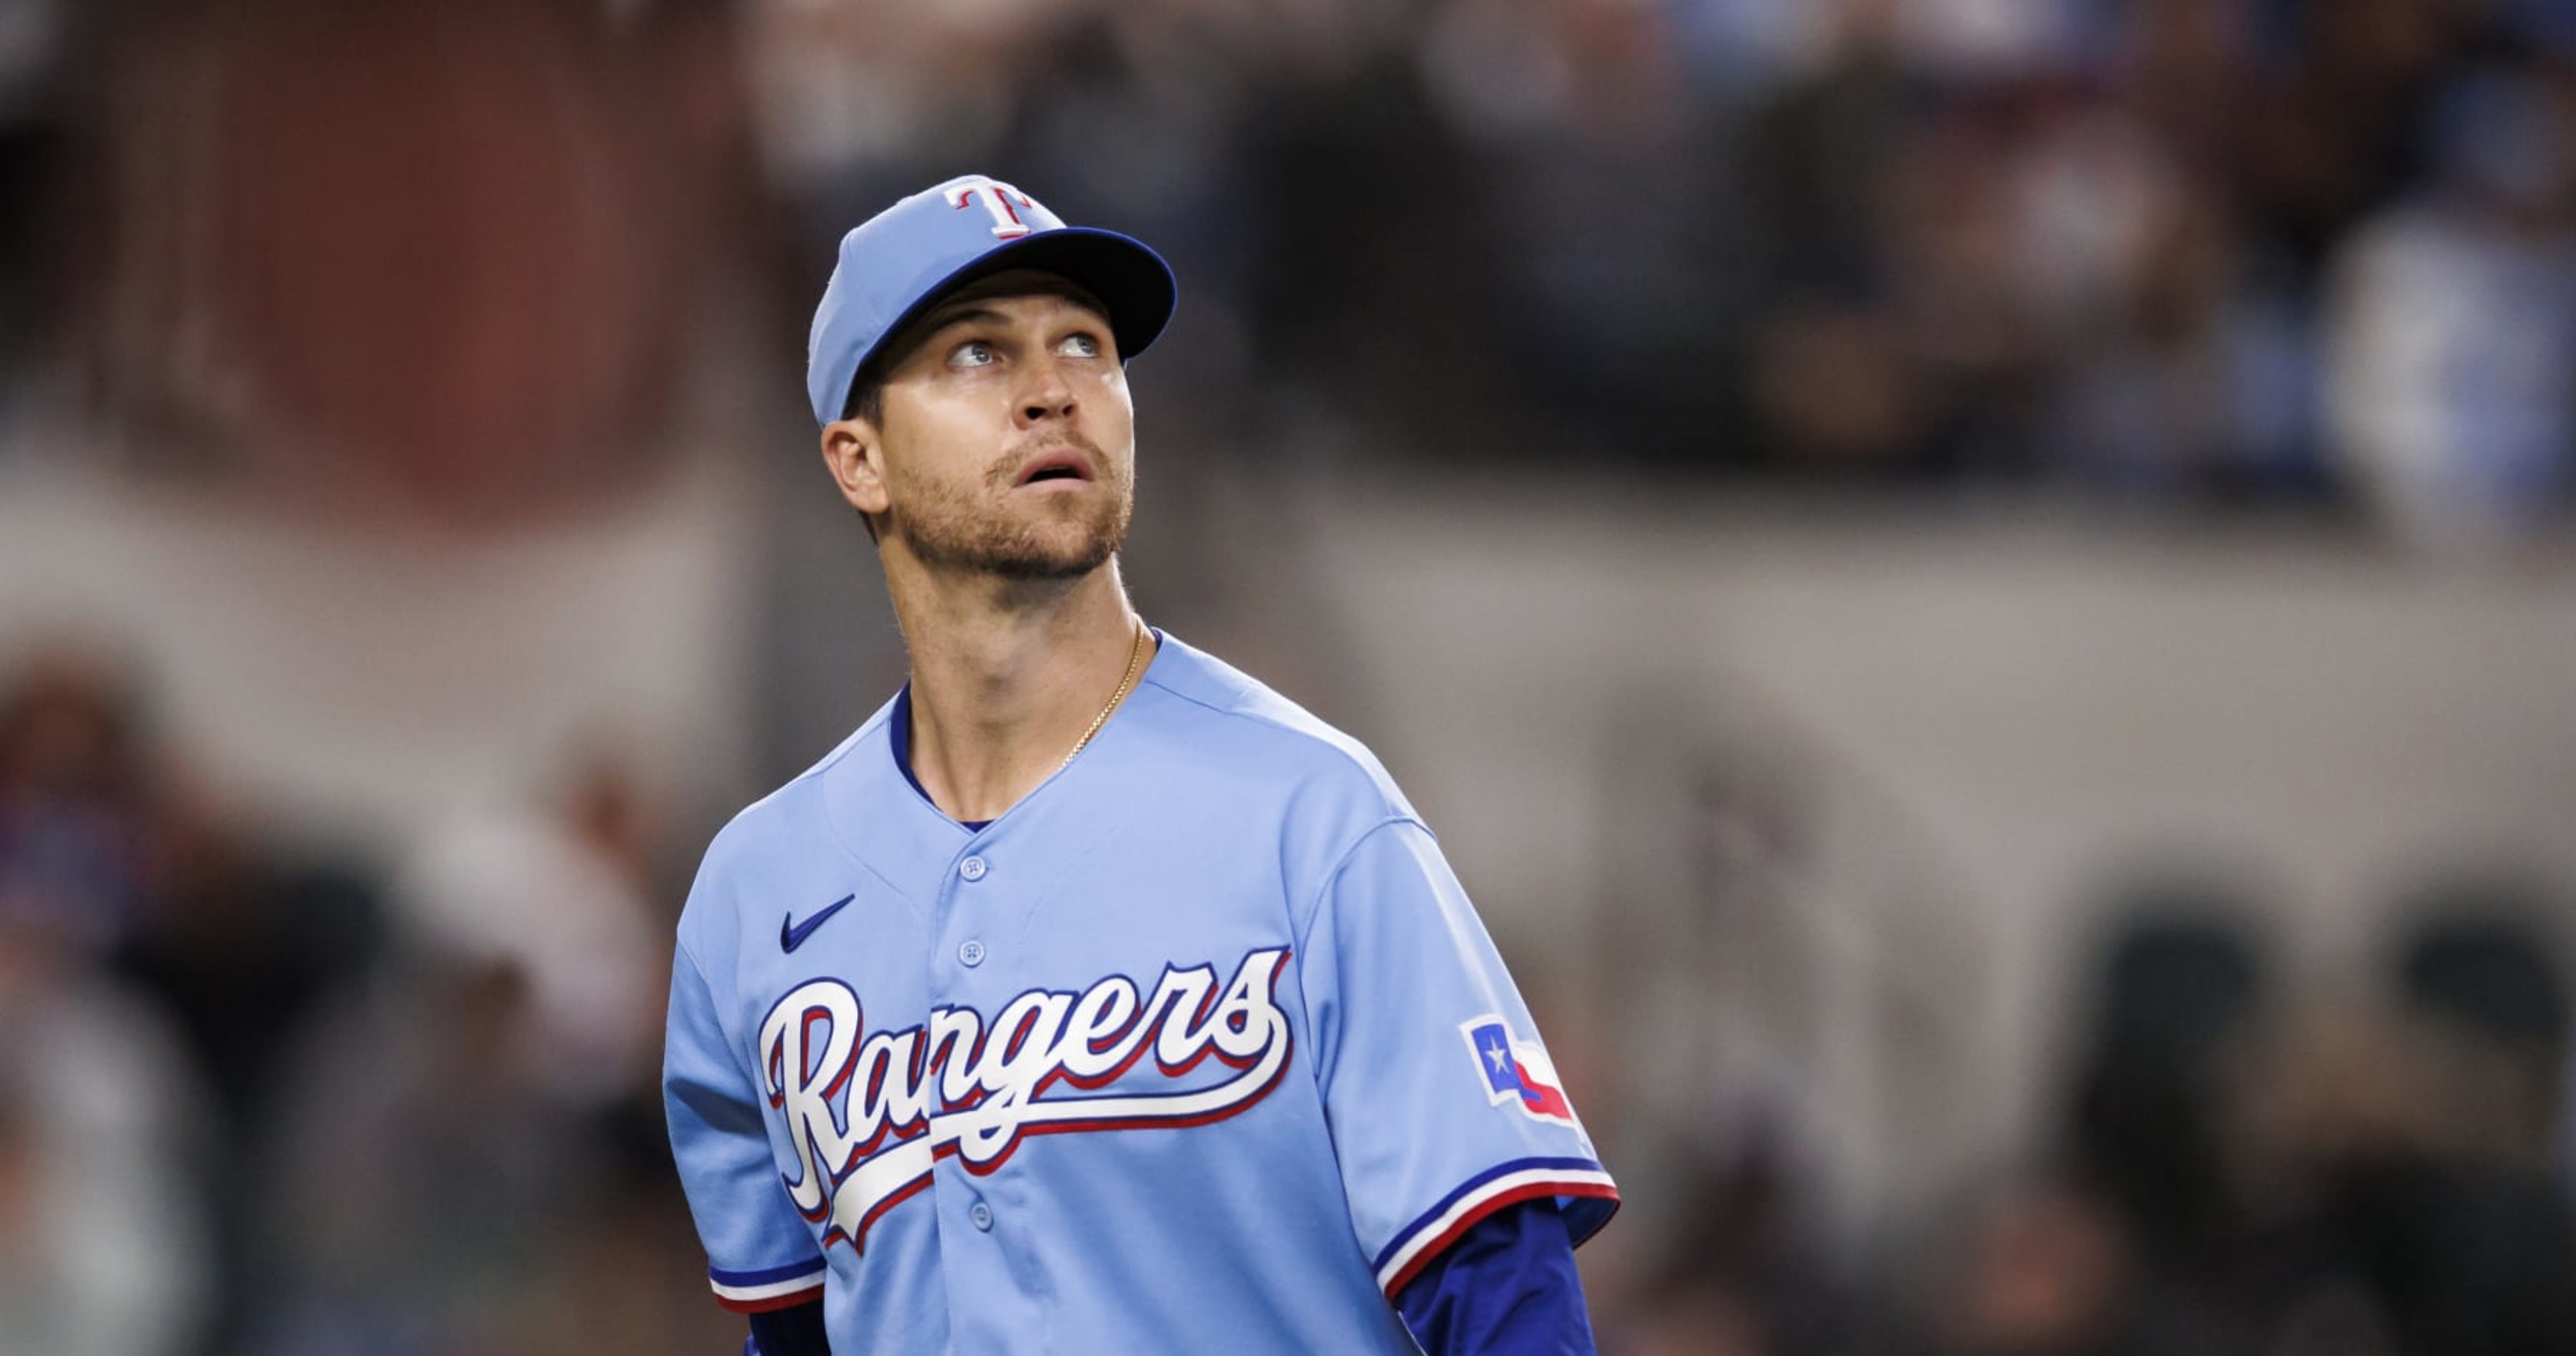 Slumping Rangers trying to tune out trade rumors: 'We still got to